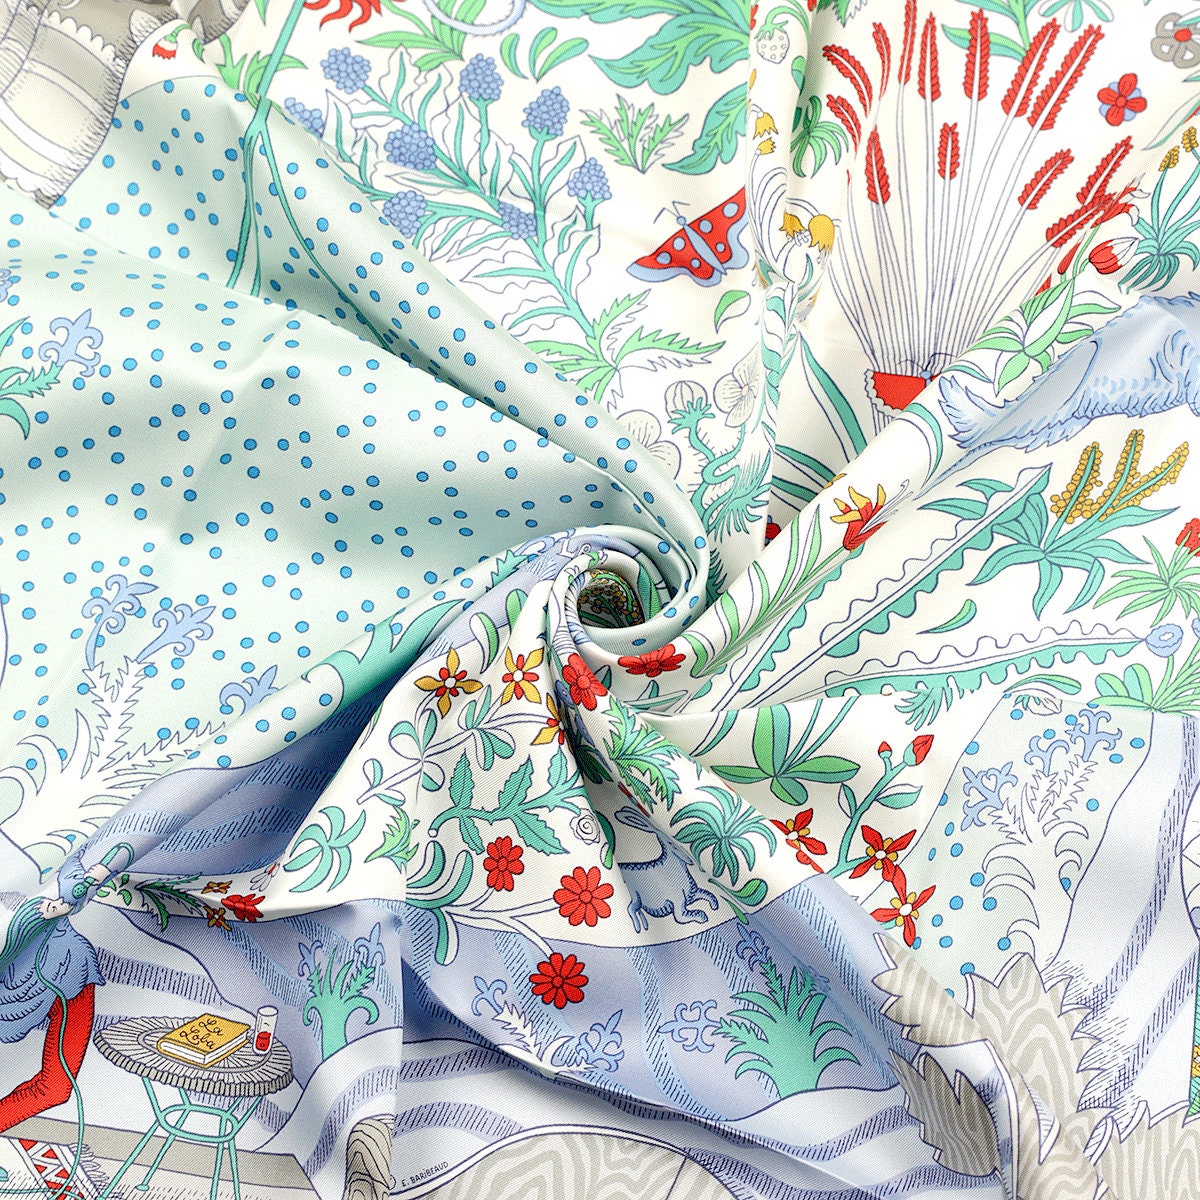 Hermes Scarf "Le Premier Chant" by Sophia Andreotti and Édouard Baribeaud 90cm Silk | Carre Foulard